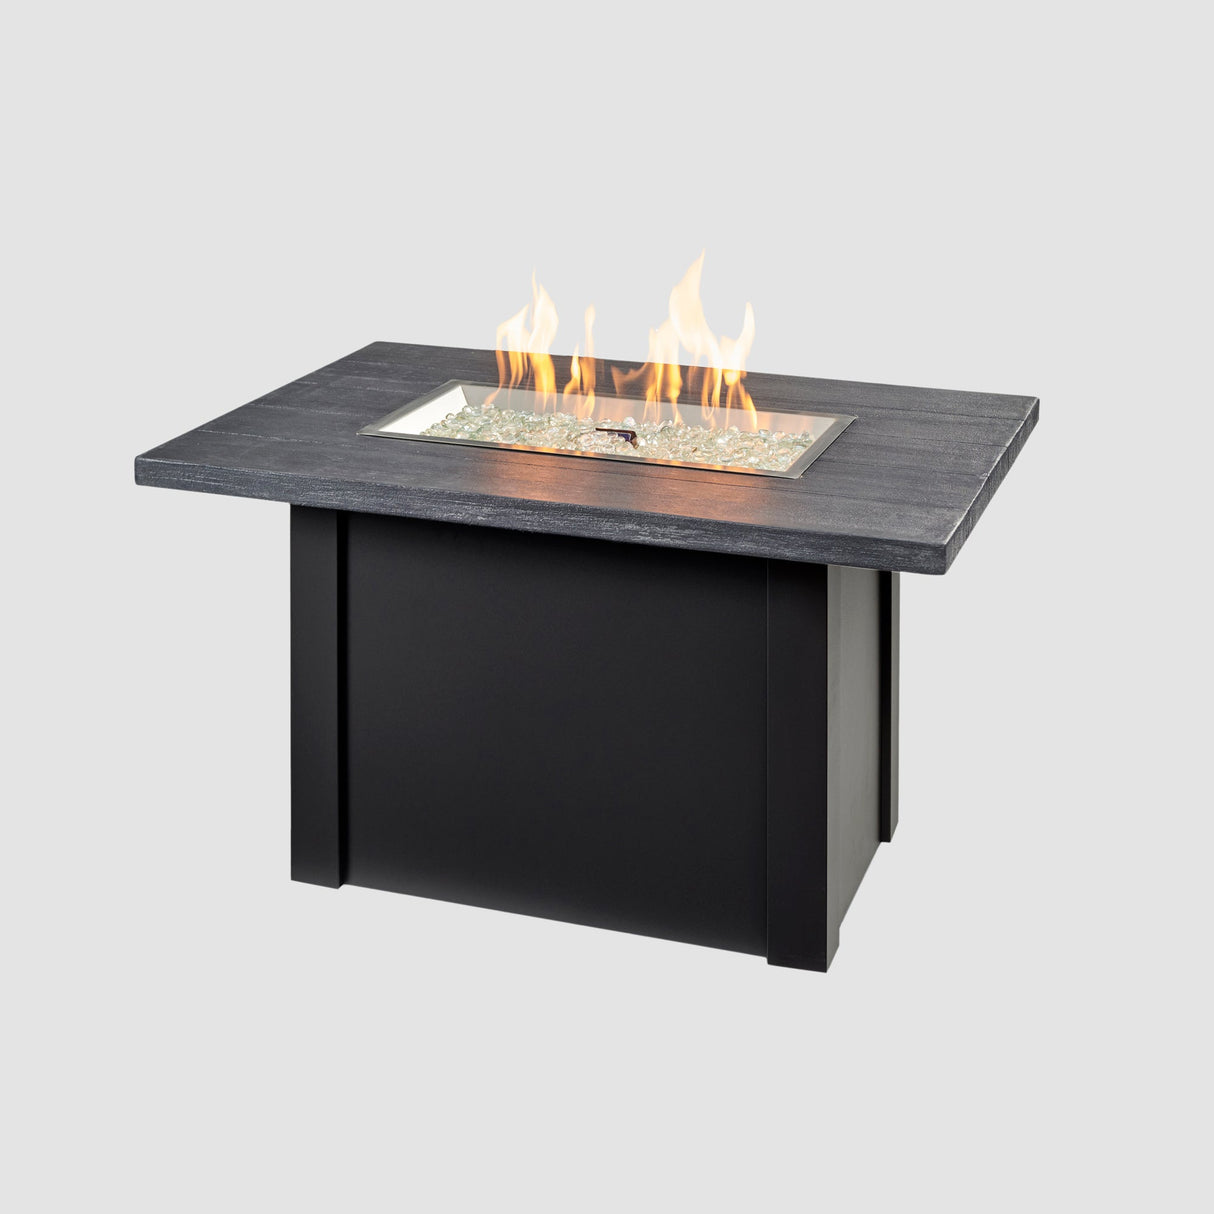 A large flame coming off the burner of a Havenwood Rectangular Gas Fire Pit Table with a Carbon Grey top and Luverne Black base